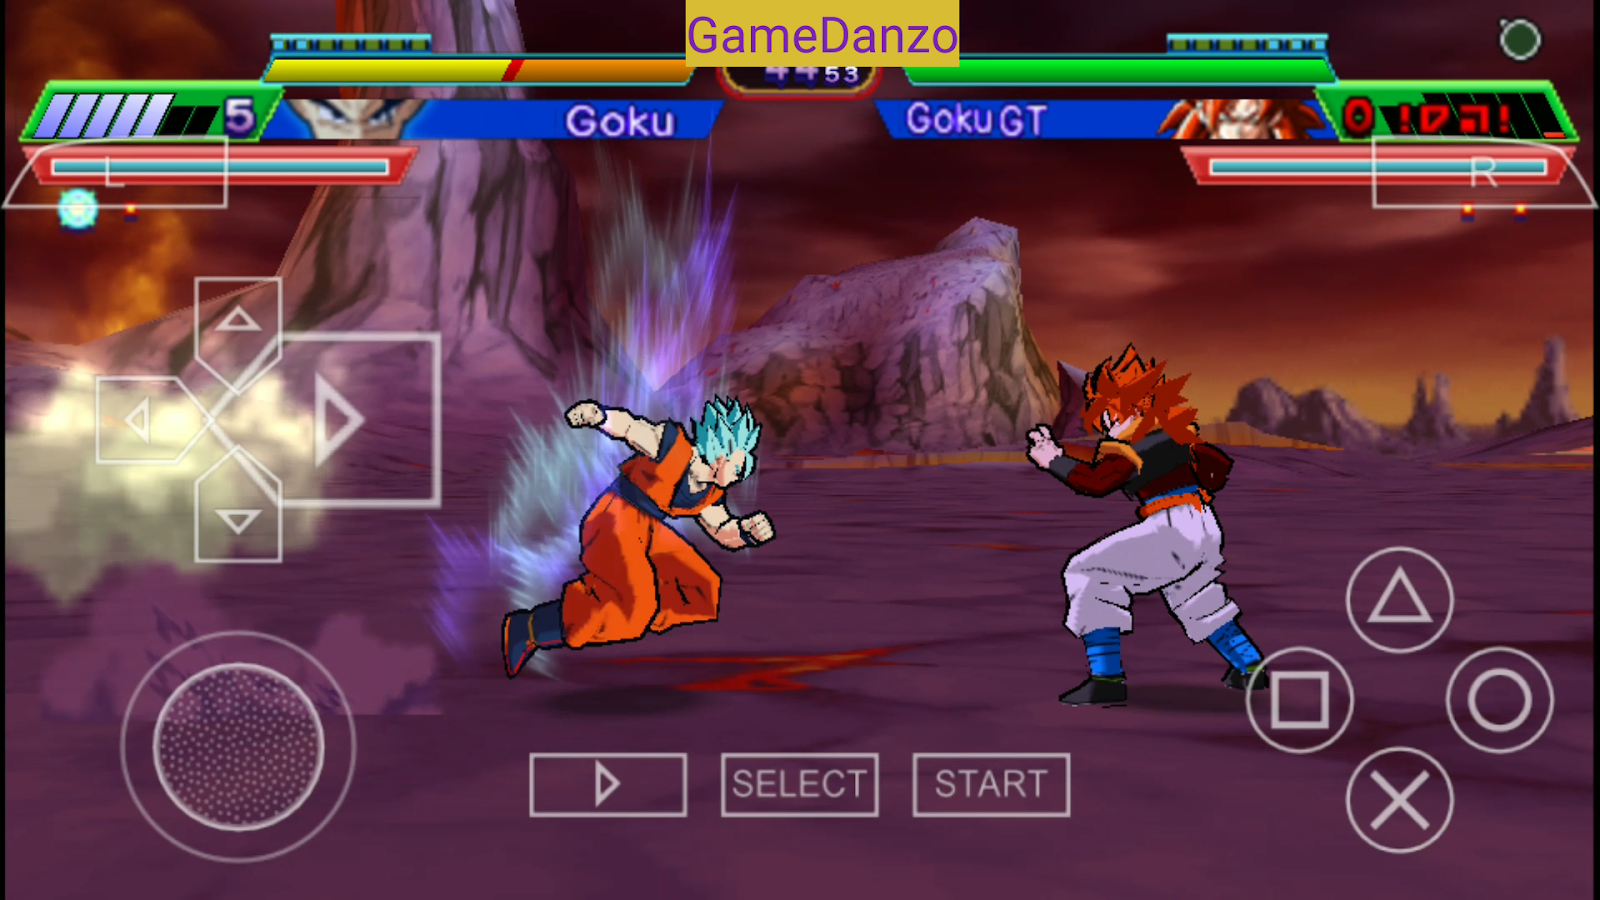 Dragon ball z ppsspp game download for pc utorrent